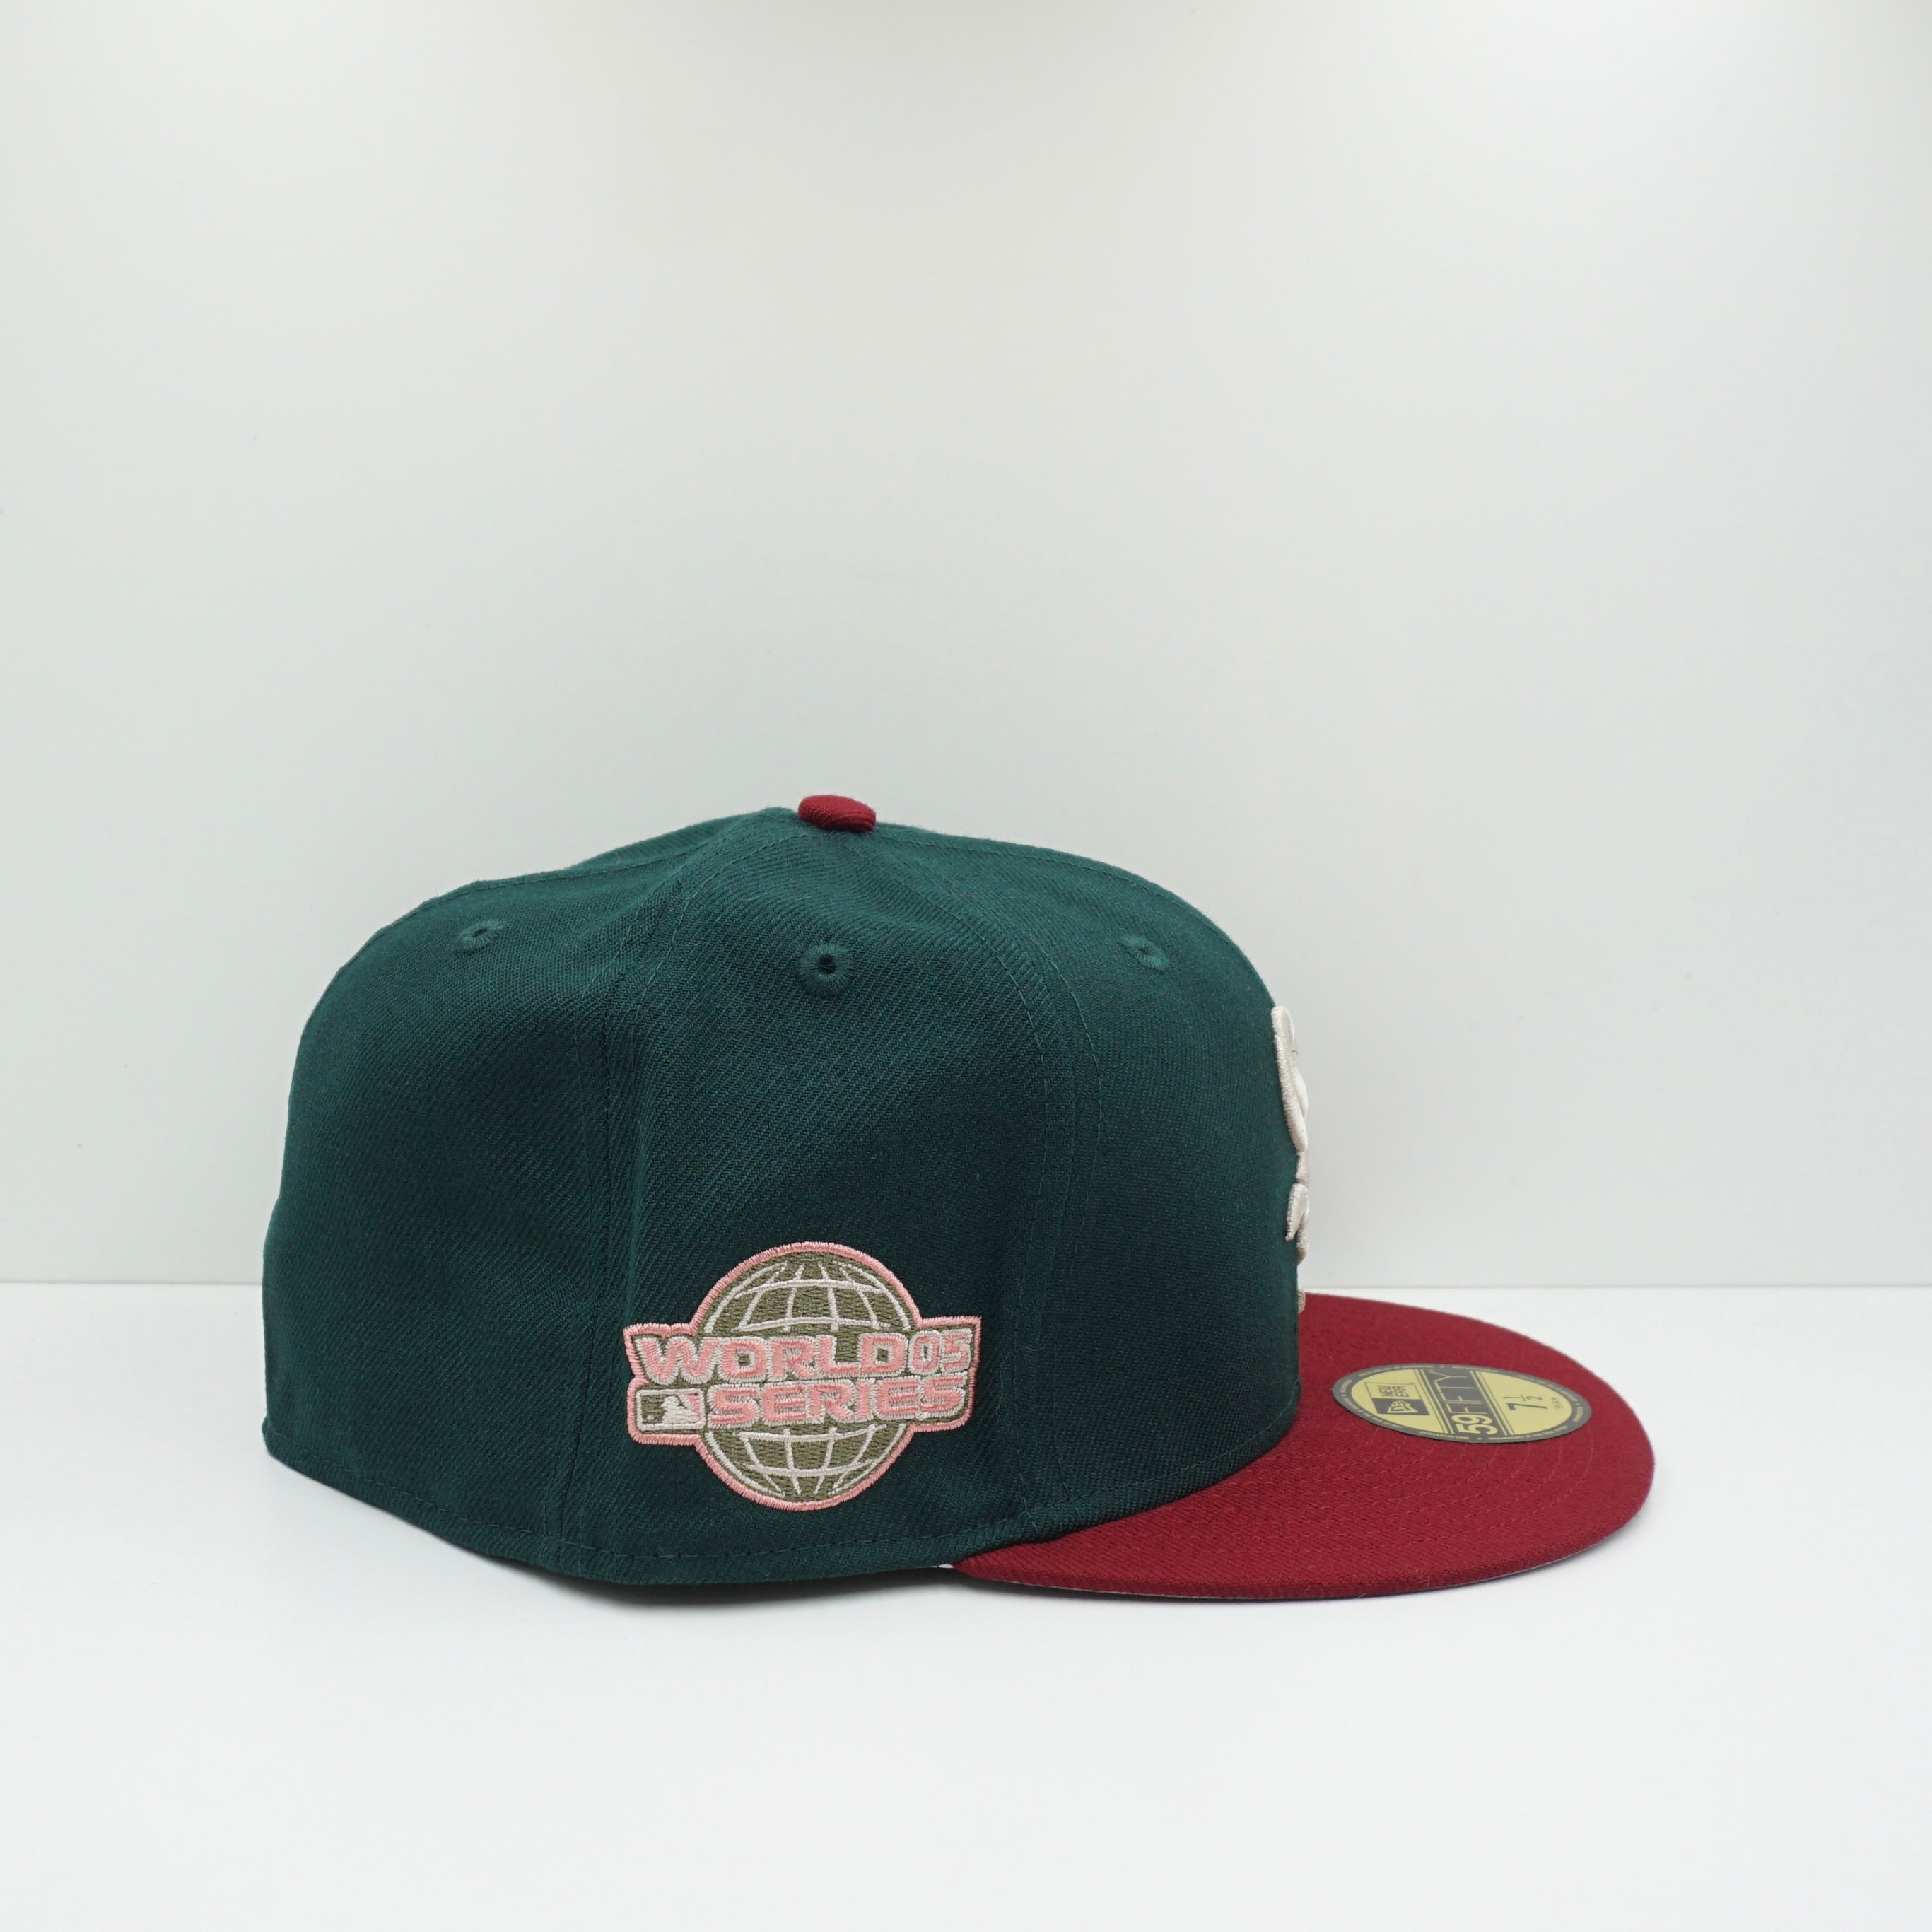 New Era Cooperstown Chicago White Sox Green/Red Fitted Cap